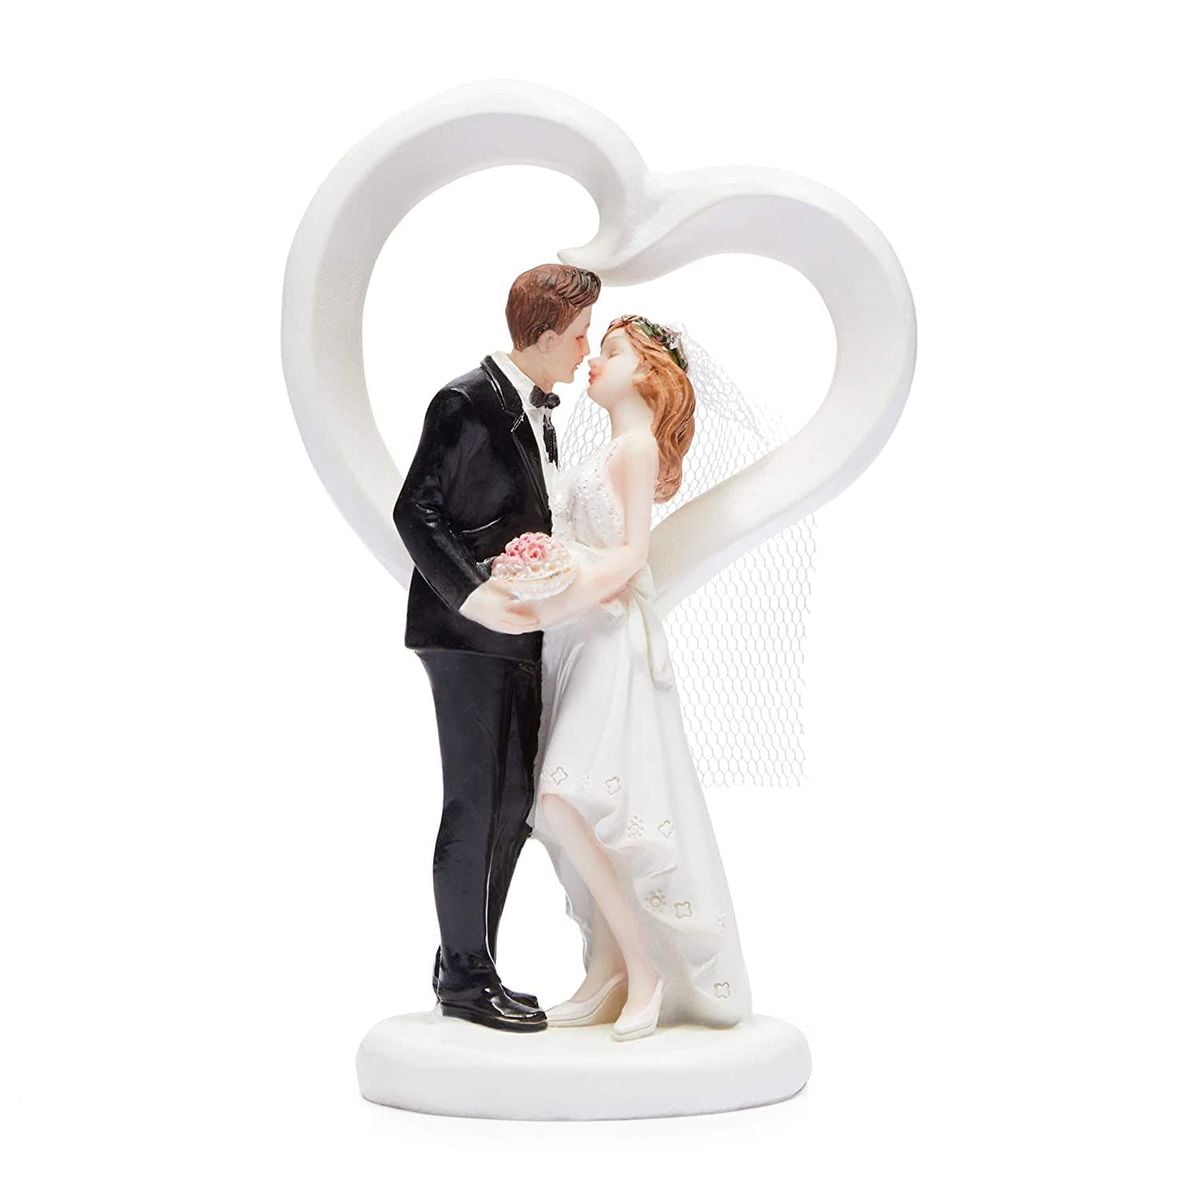 Cake Topper Wedding Ceremony Bride and Groom Newlywed Resin Cake Topper Figurine 